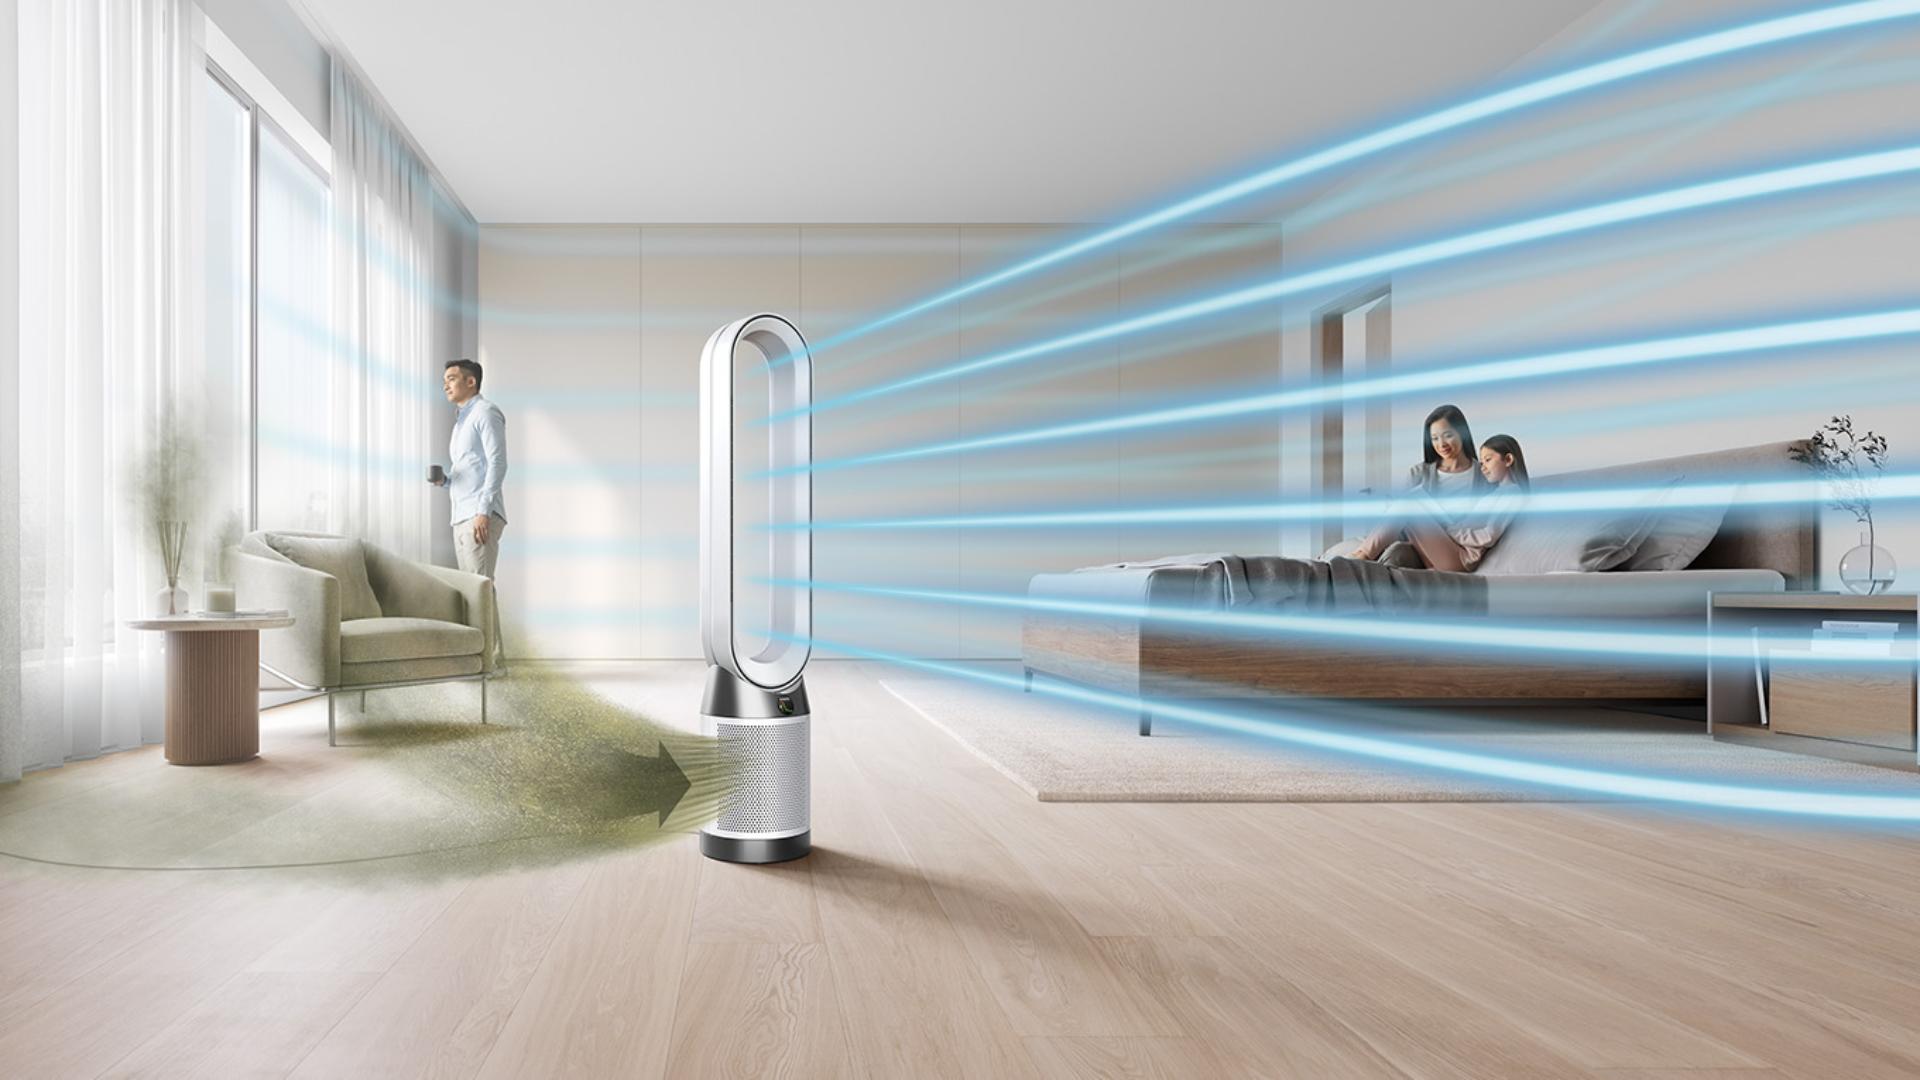 The Dyson Purifier Cool Gen1 purifying a living area.